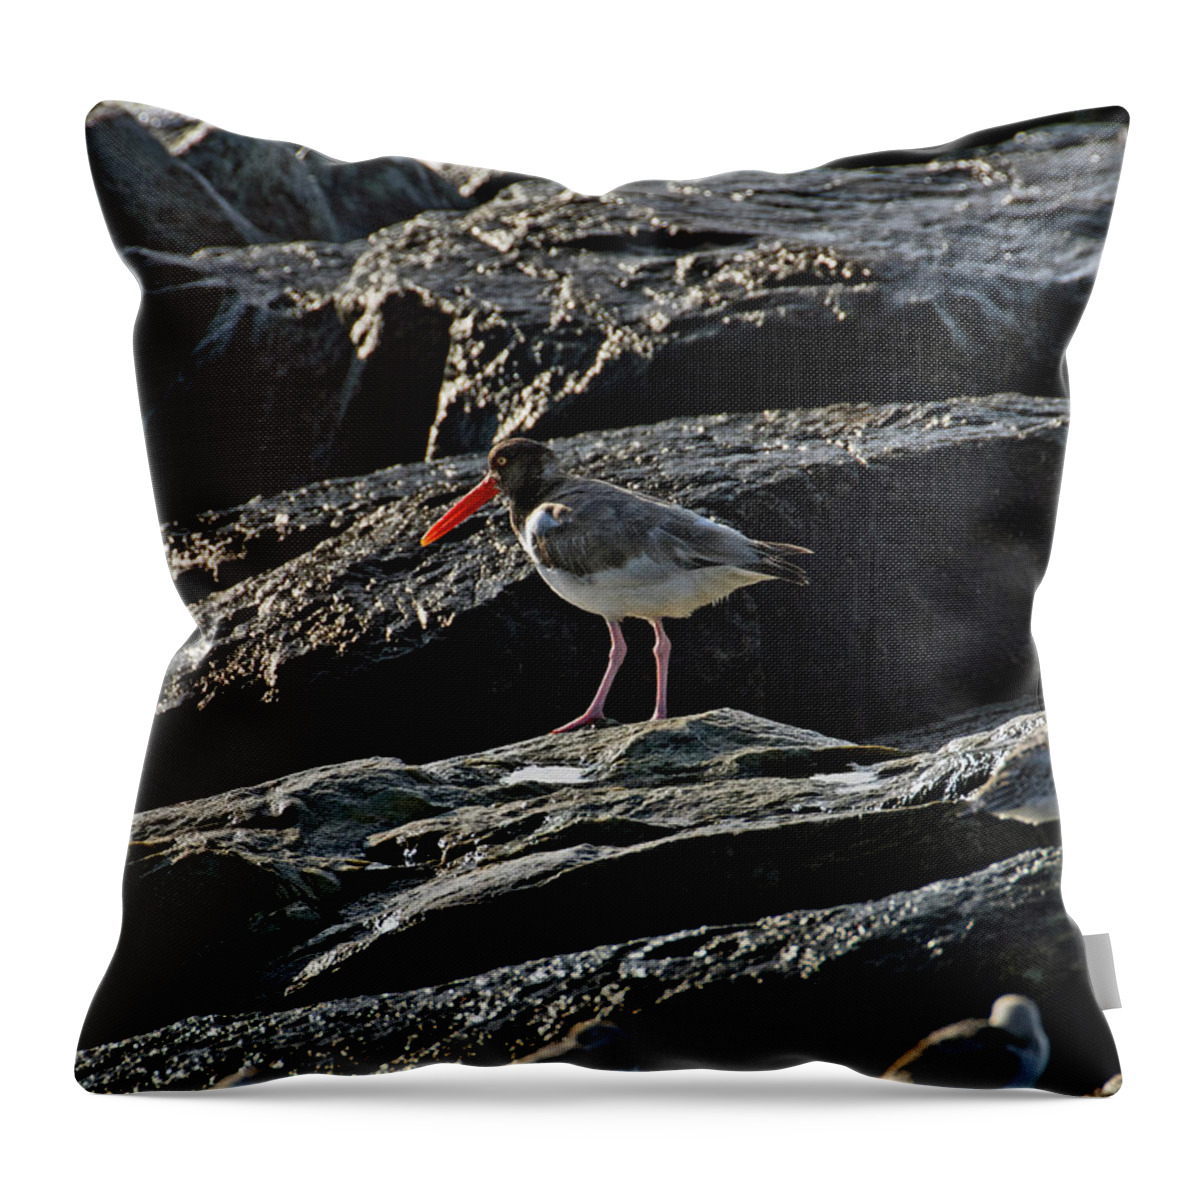 Oyster Catcher Throw Pillow featuring the photograph Oyster on the Rocks by S Paul Sahm